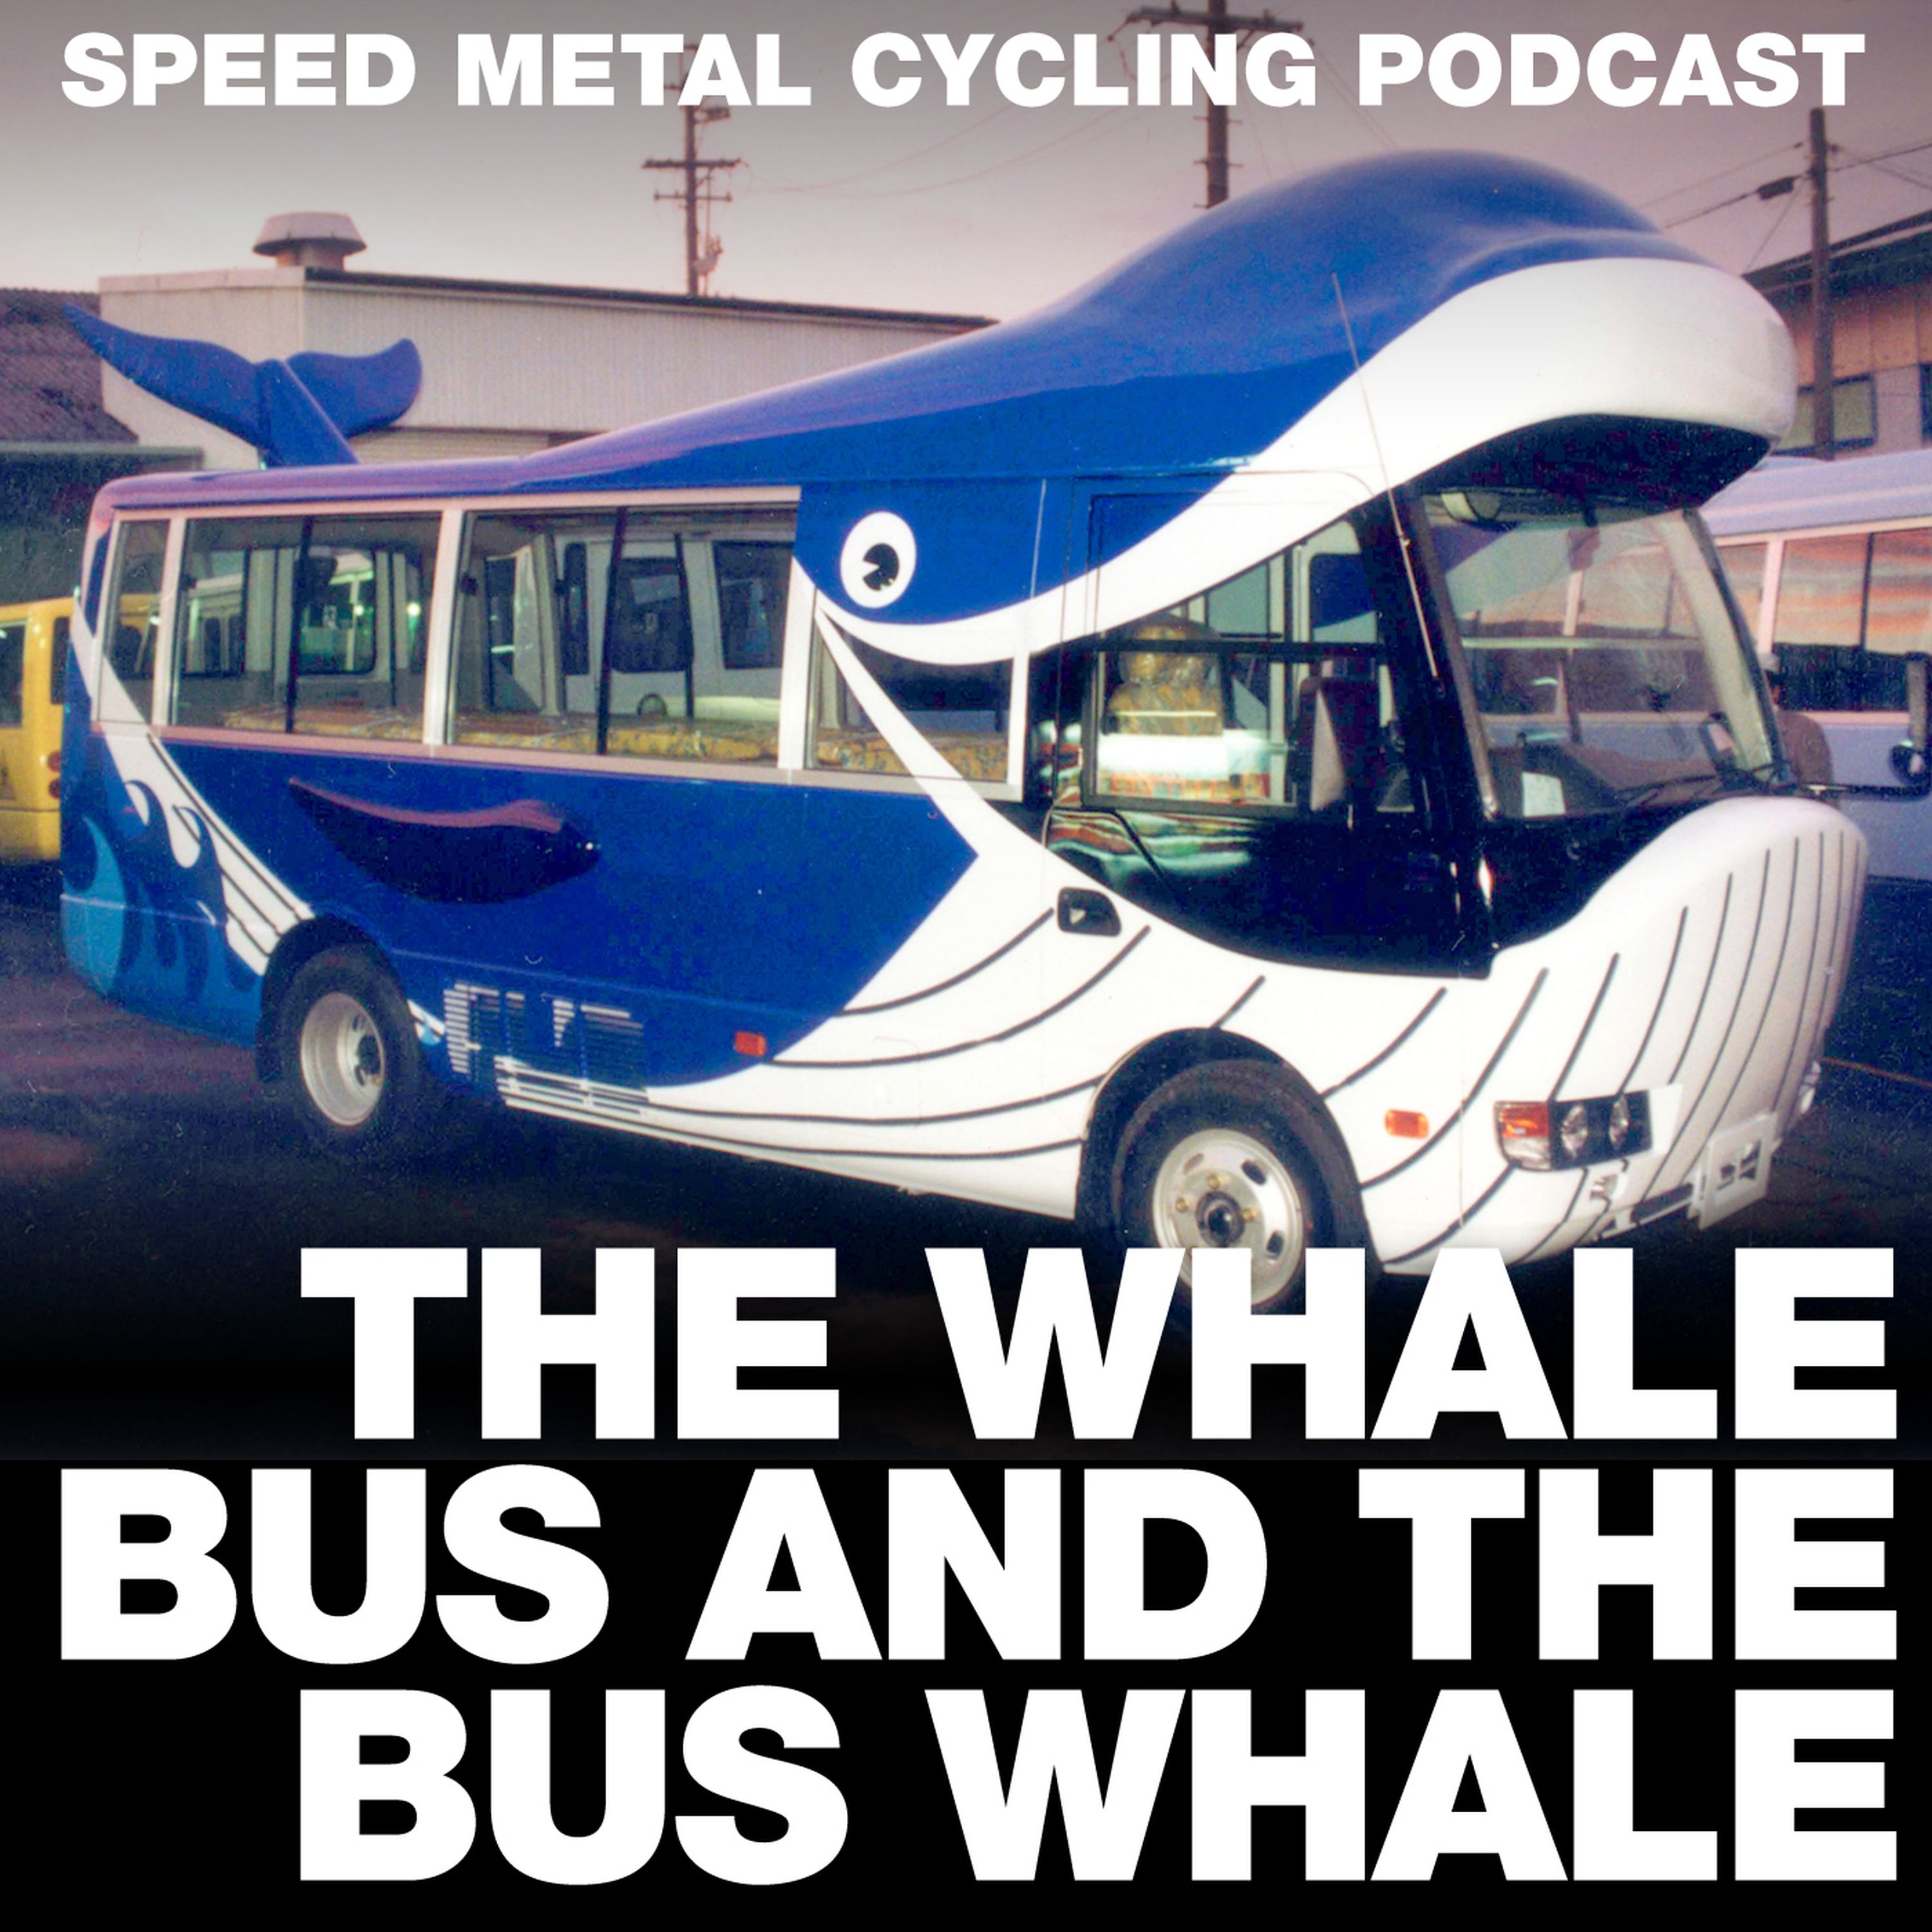 189 - The Wha Bus and the Bus Whale